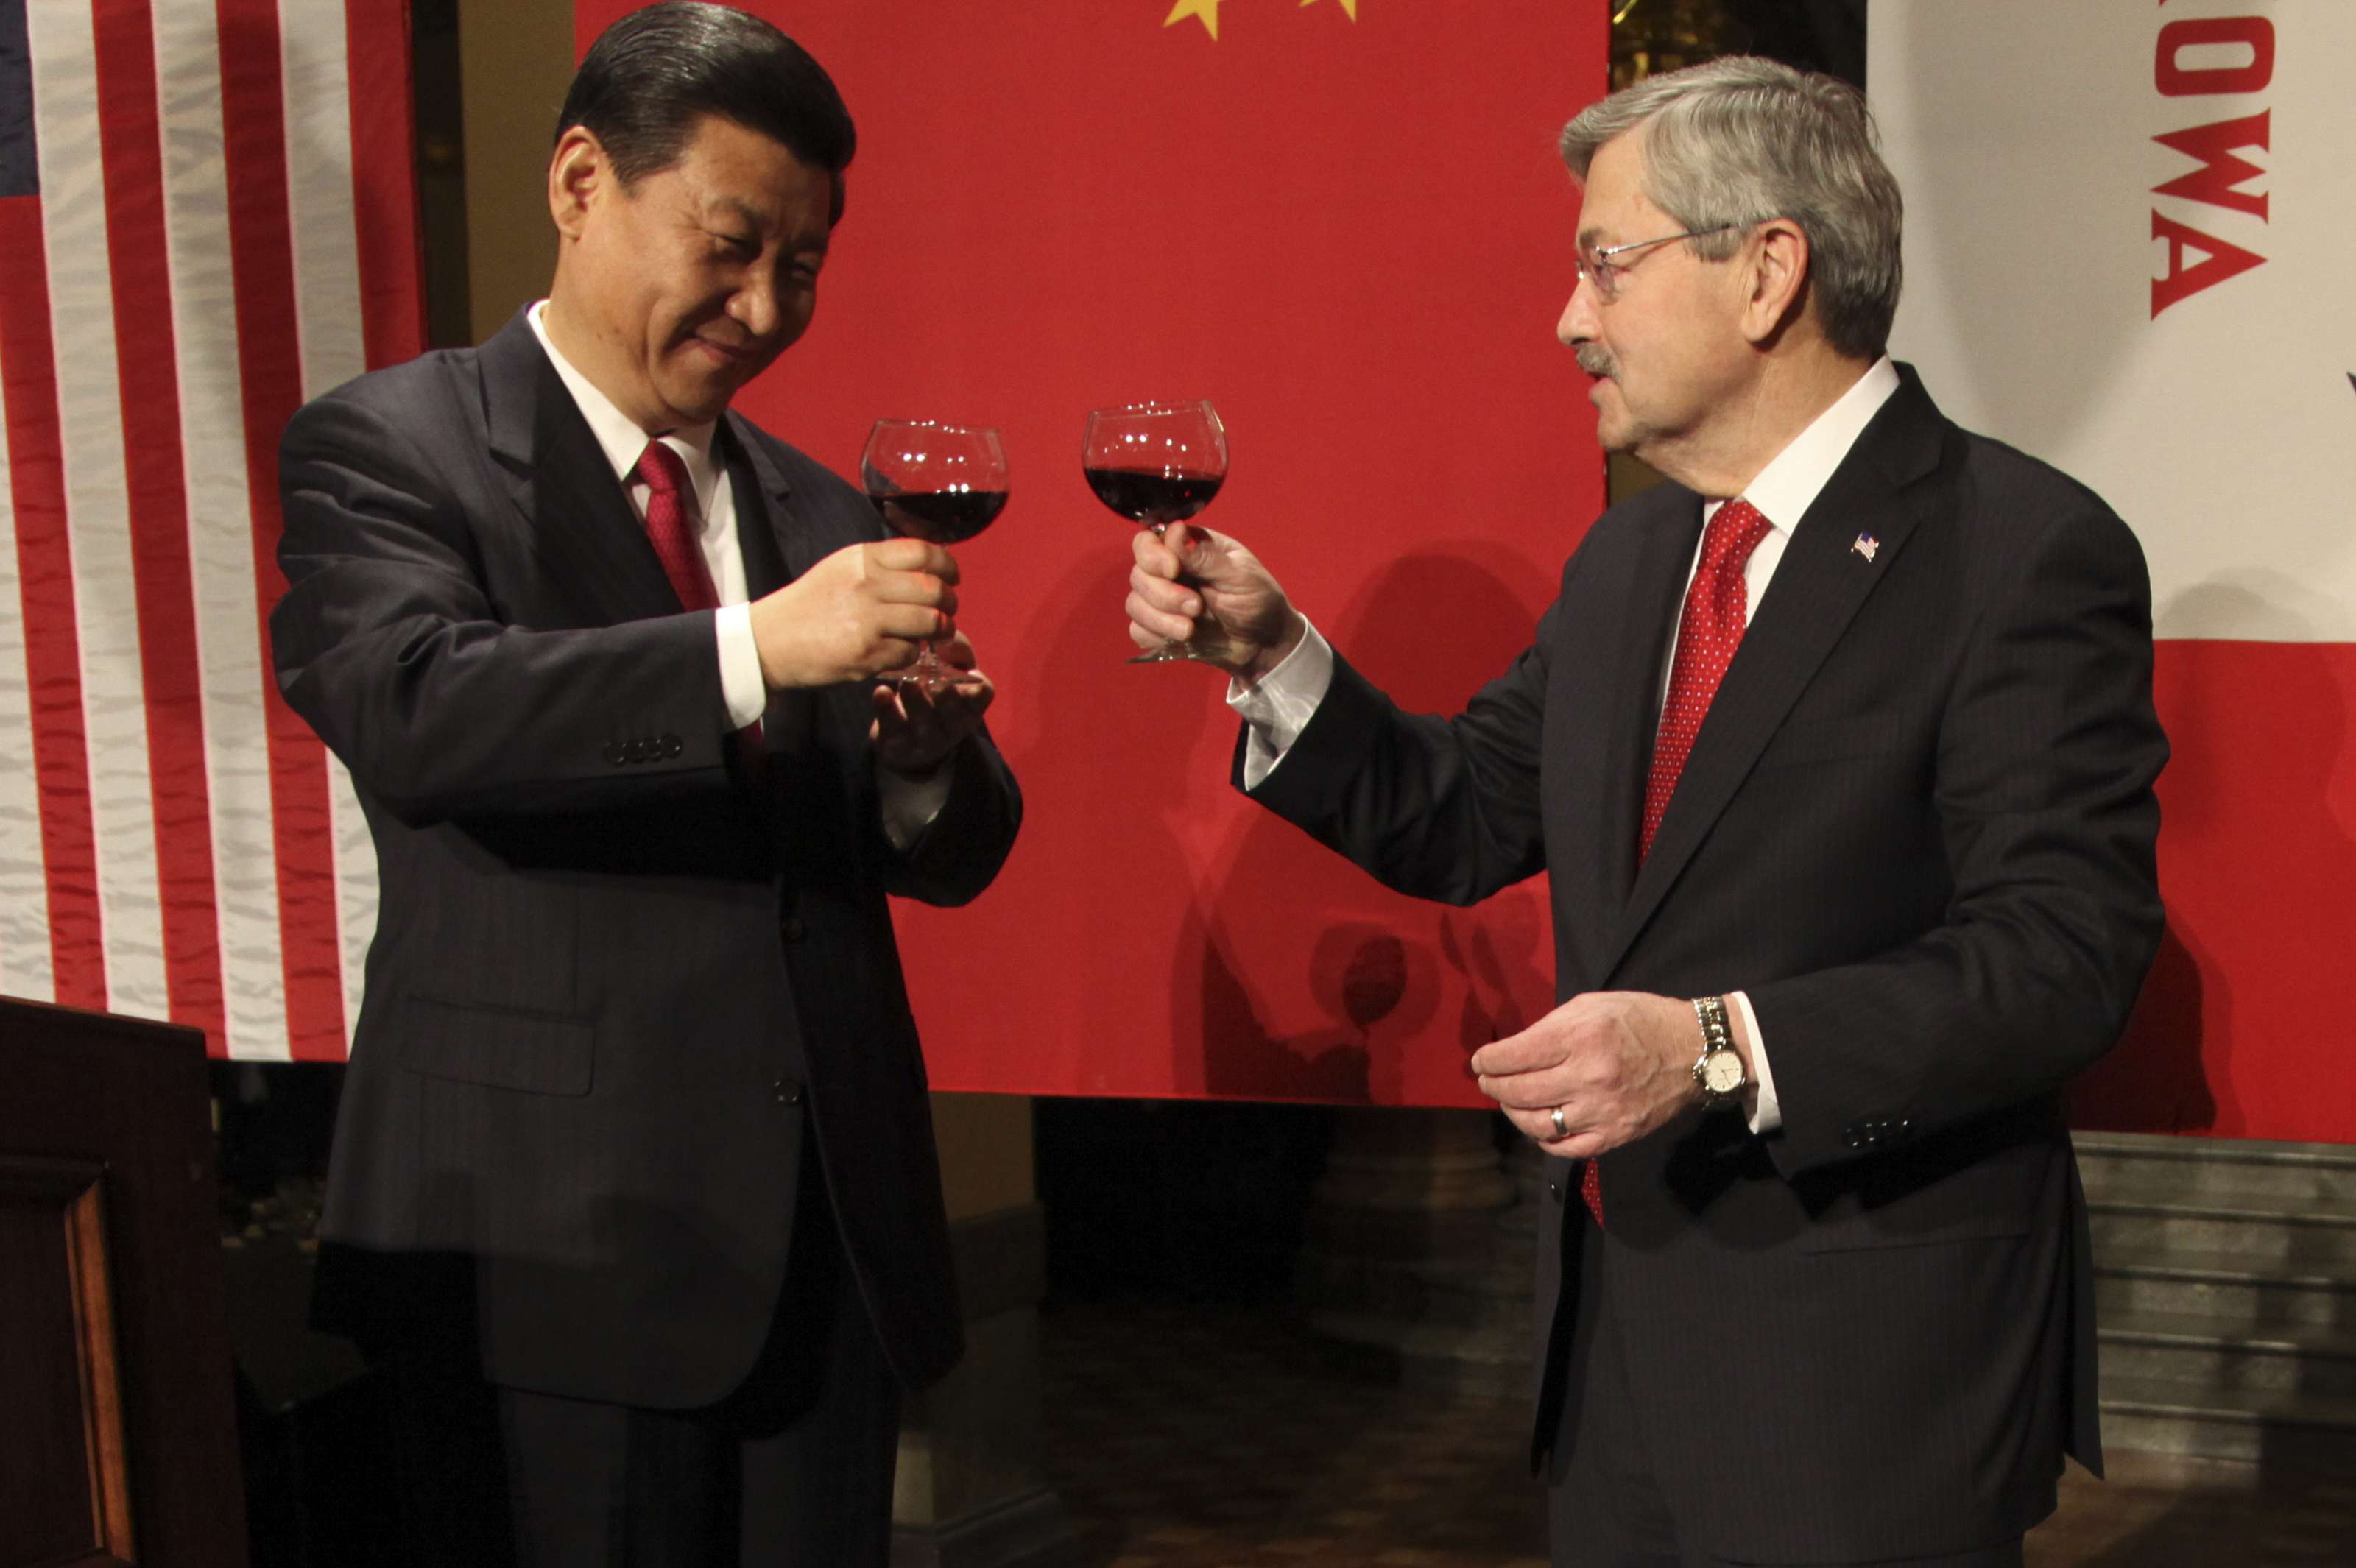 Iowa governor Terry Branstad raises a toast to then vice-president Xi Jinping in the state capital Des Moines on February 15, 2012. Photo: AFP